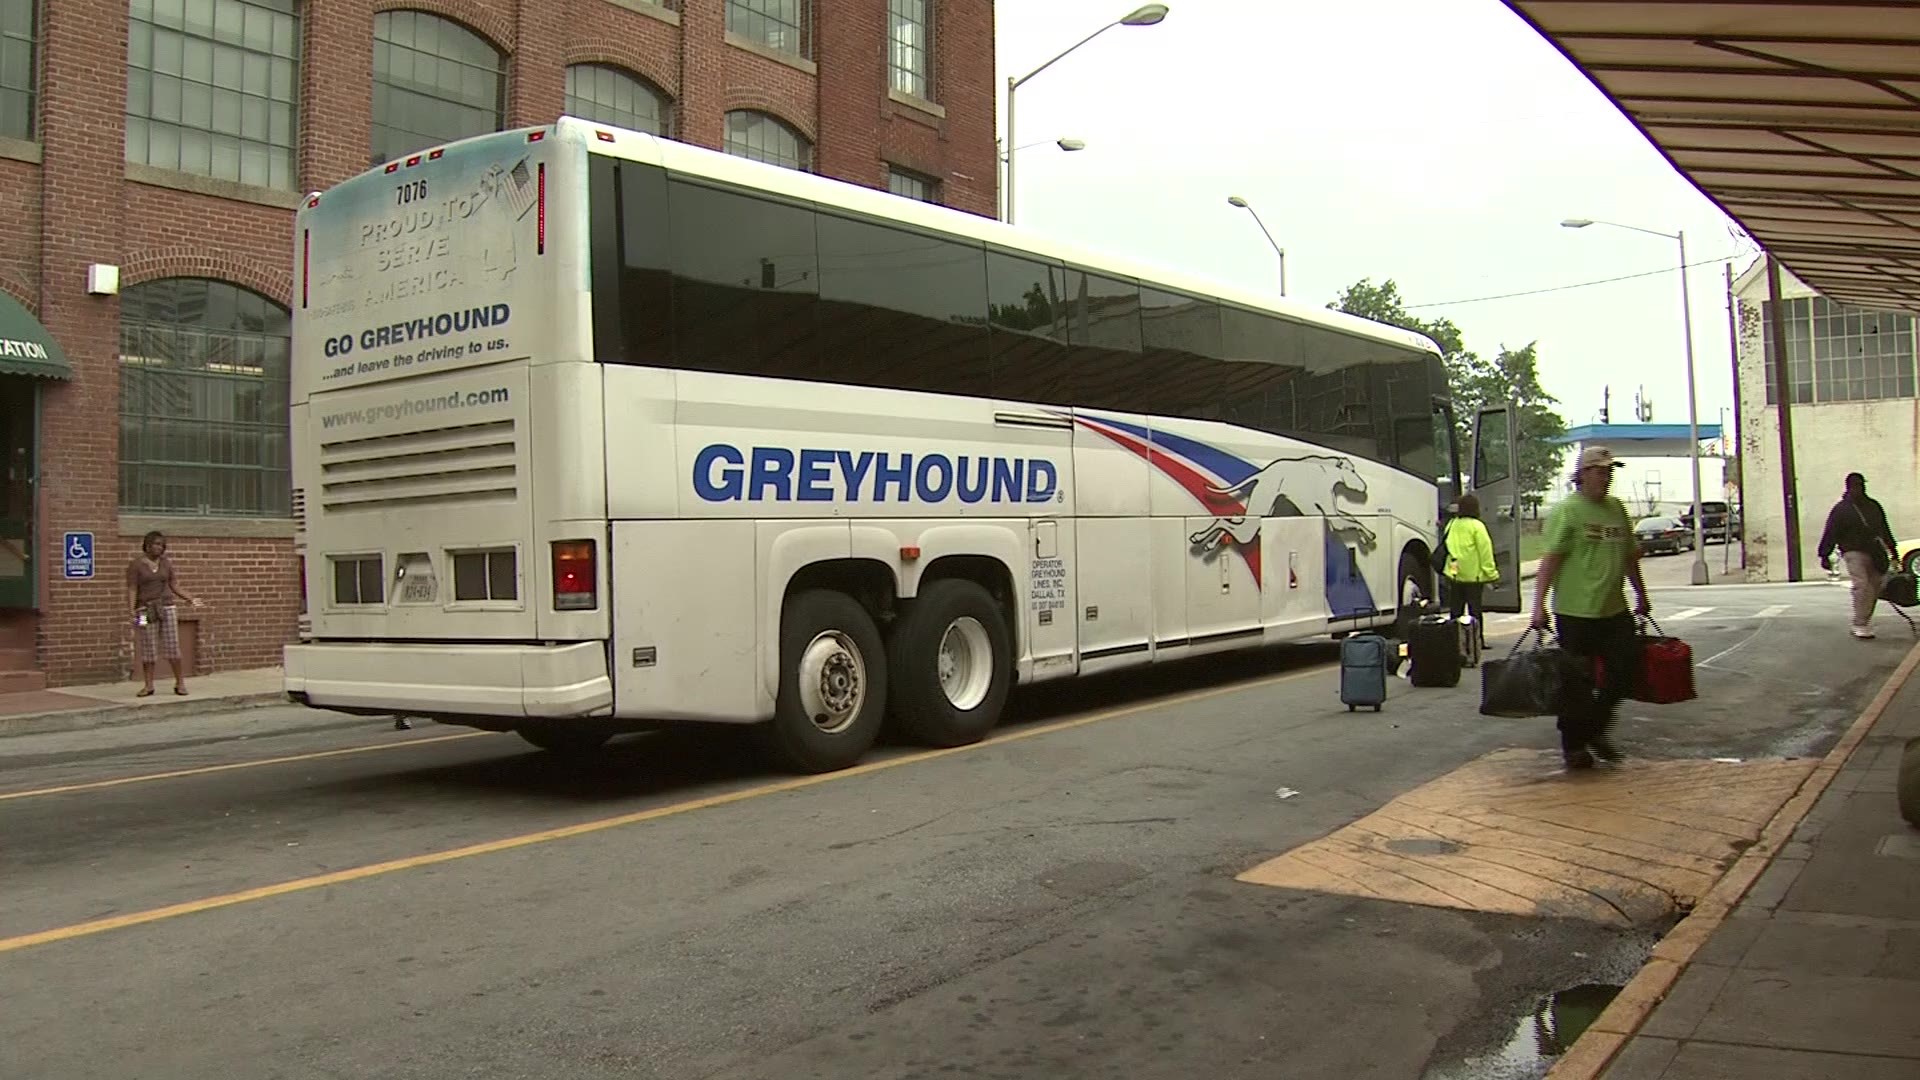 Greyhound, the intercity bus service company, is taking a stance regarding immigration in the United States. The company announced Friday that it will not allow Customs and Border Protection (CBP) agents to search its buses without warrants.
In a statement, Greyhound said it will provide its drivers and employees with new training to follow its policy change. The buses will also display a special sticker making its position against CBP clear.
The company says its main goal and concern is the safety of its passengers and believes this new policy will help improve the travel experience for all its customers.
Officials with CBP say its agents are trained on protocols to ask for consent from companies before boarding a bus.